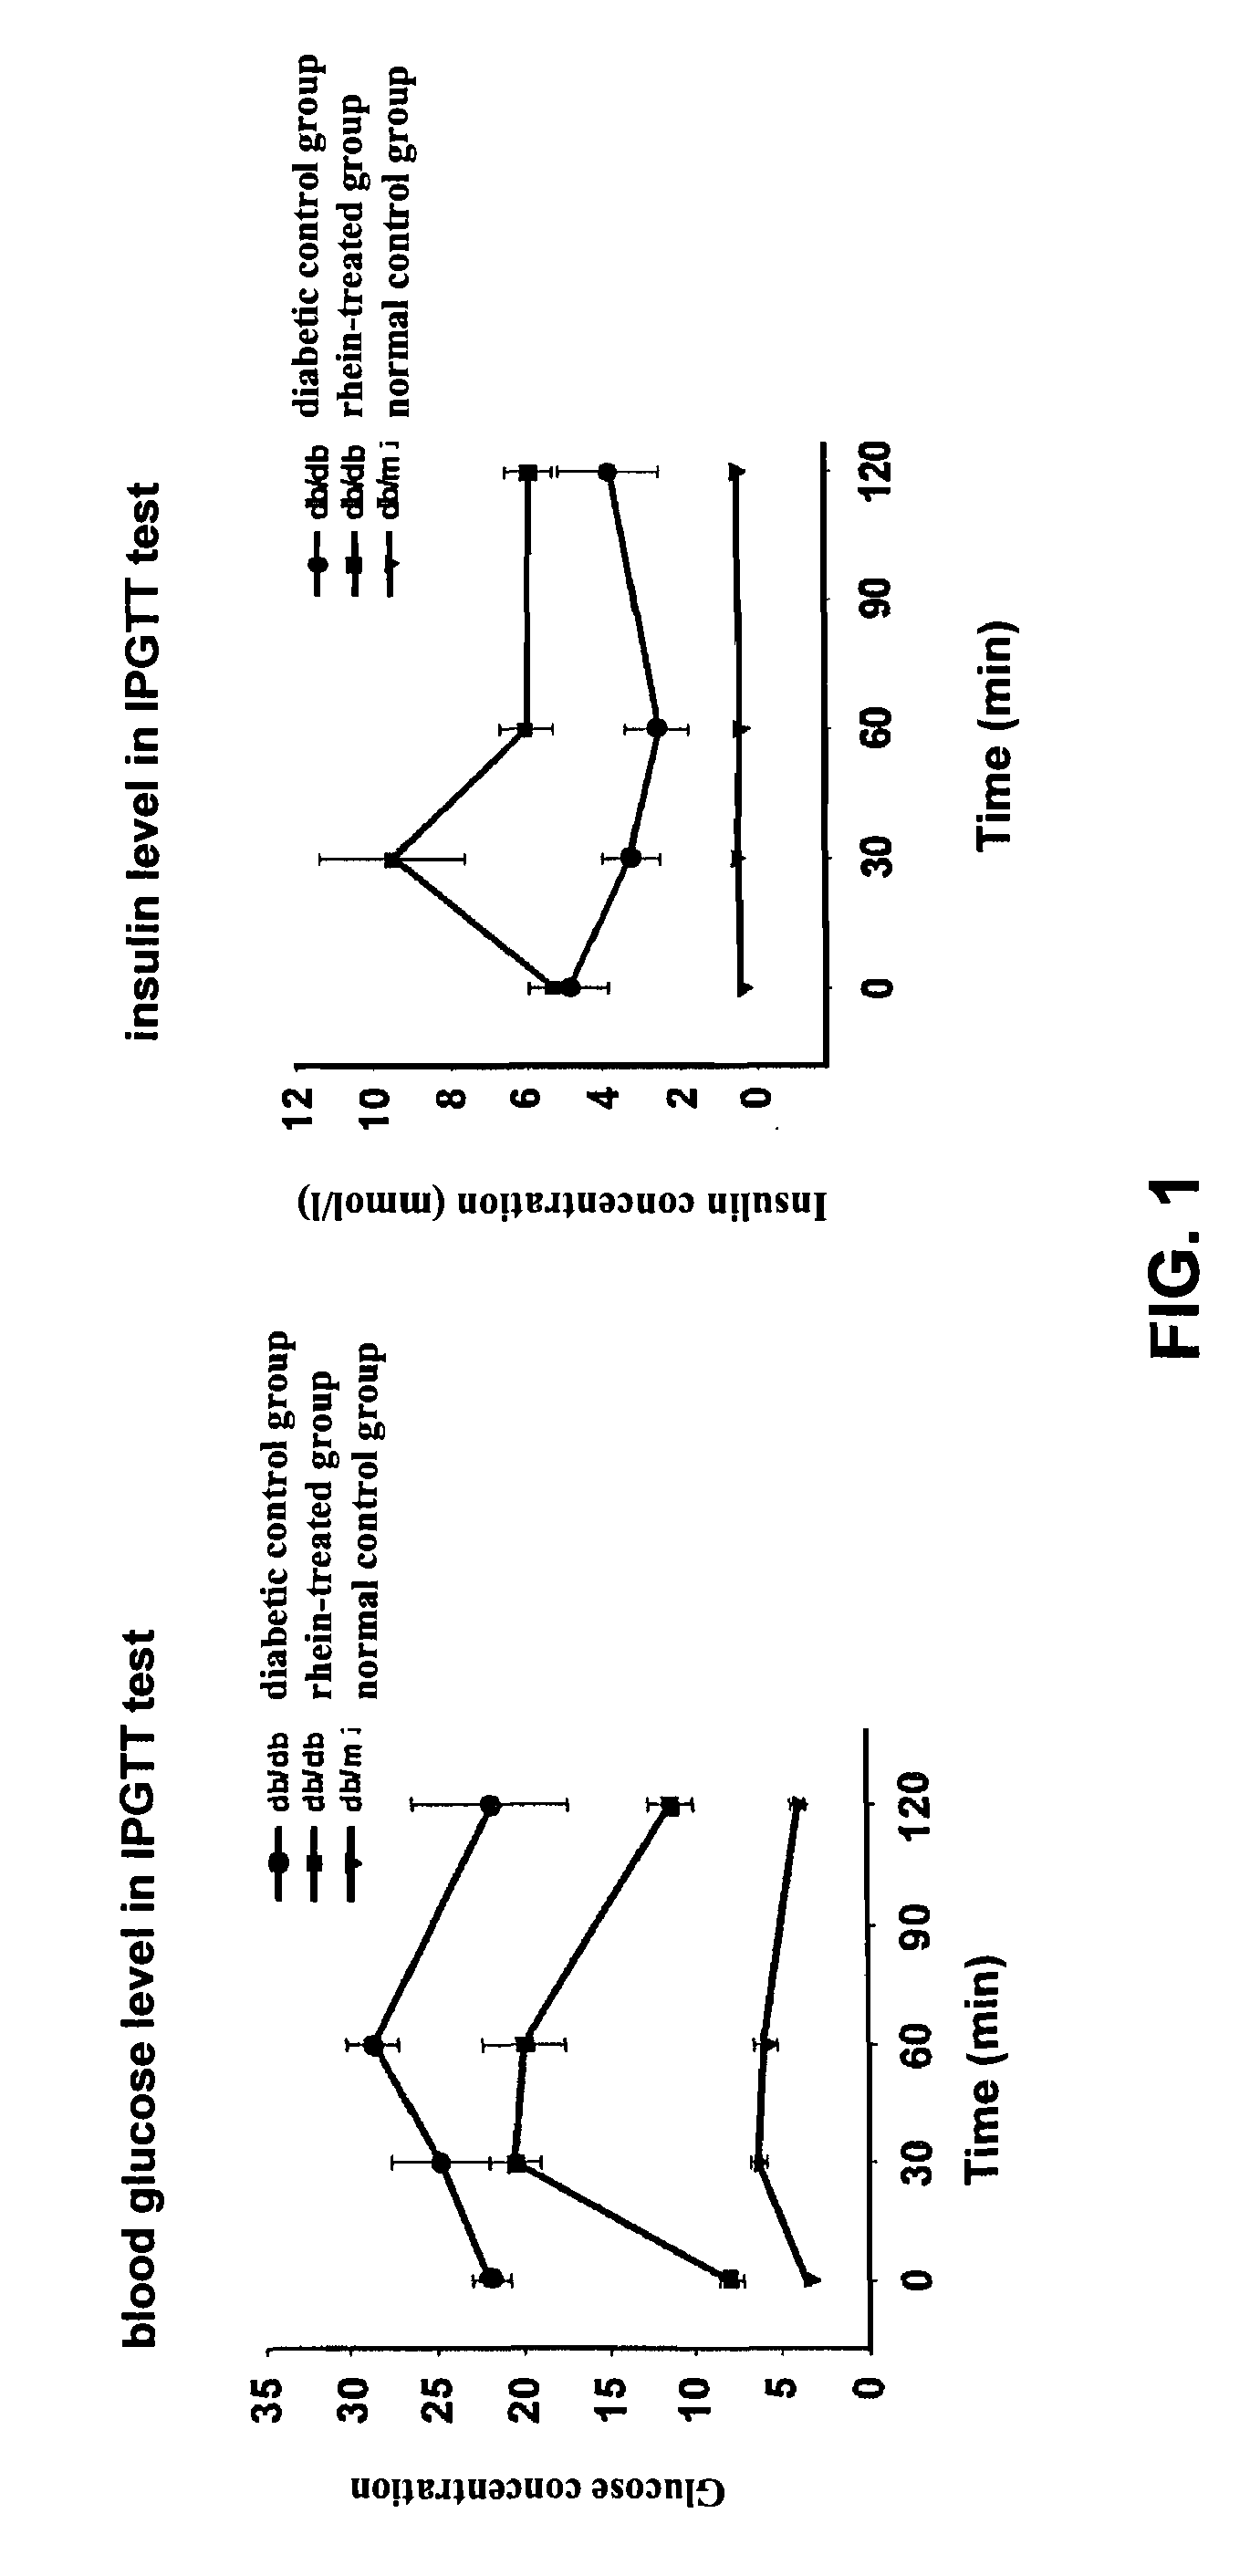 Method of a rhein compound for inhibiting pancreatic islet beta-cell dysfunction and preventing or treating a pancreatic islet beta-cell dysfunction related disorder